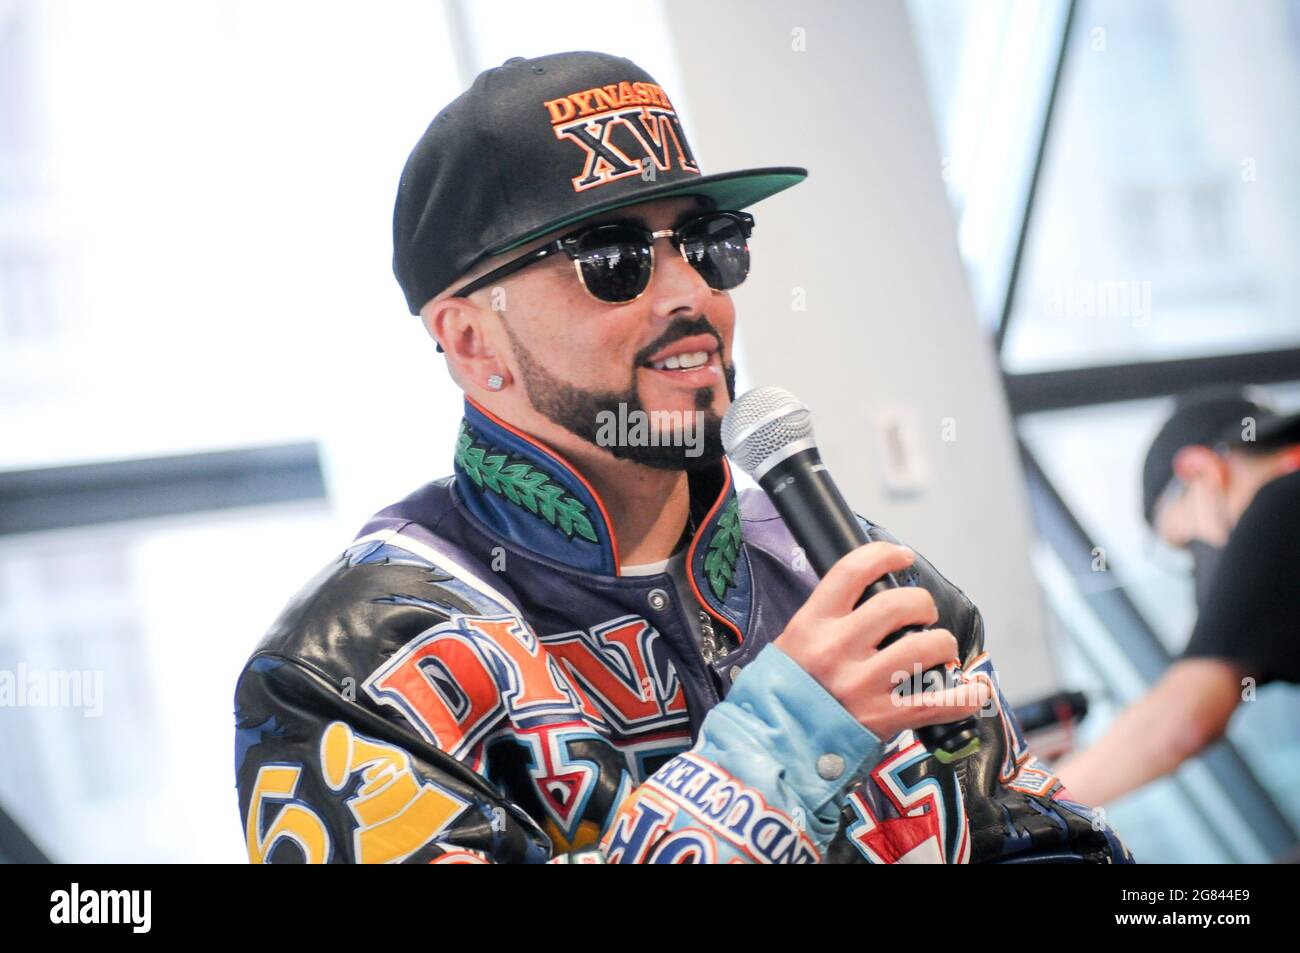 New York, USA. 16th July, 2021. artist Yandel (Llandel Veguilla Malavé) attends a press to promote the new album 'DYNASTY', held at the PUMA Store, in New York City.In honor